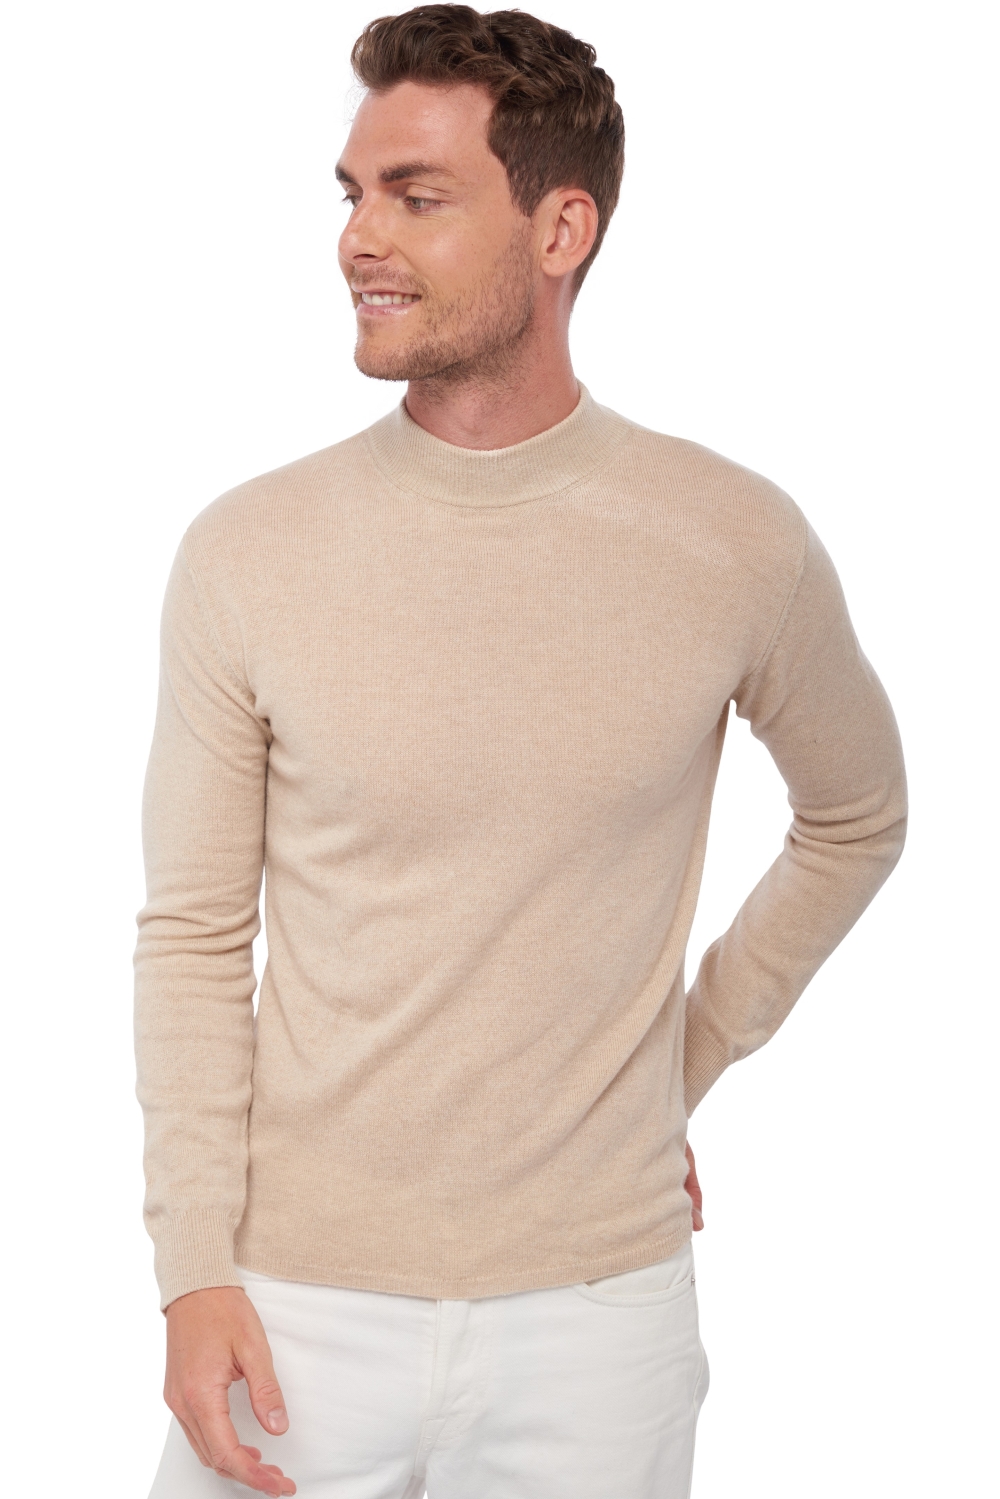 Cachemire pull homme frederic natural beige l